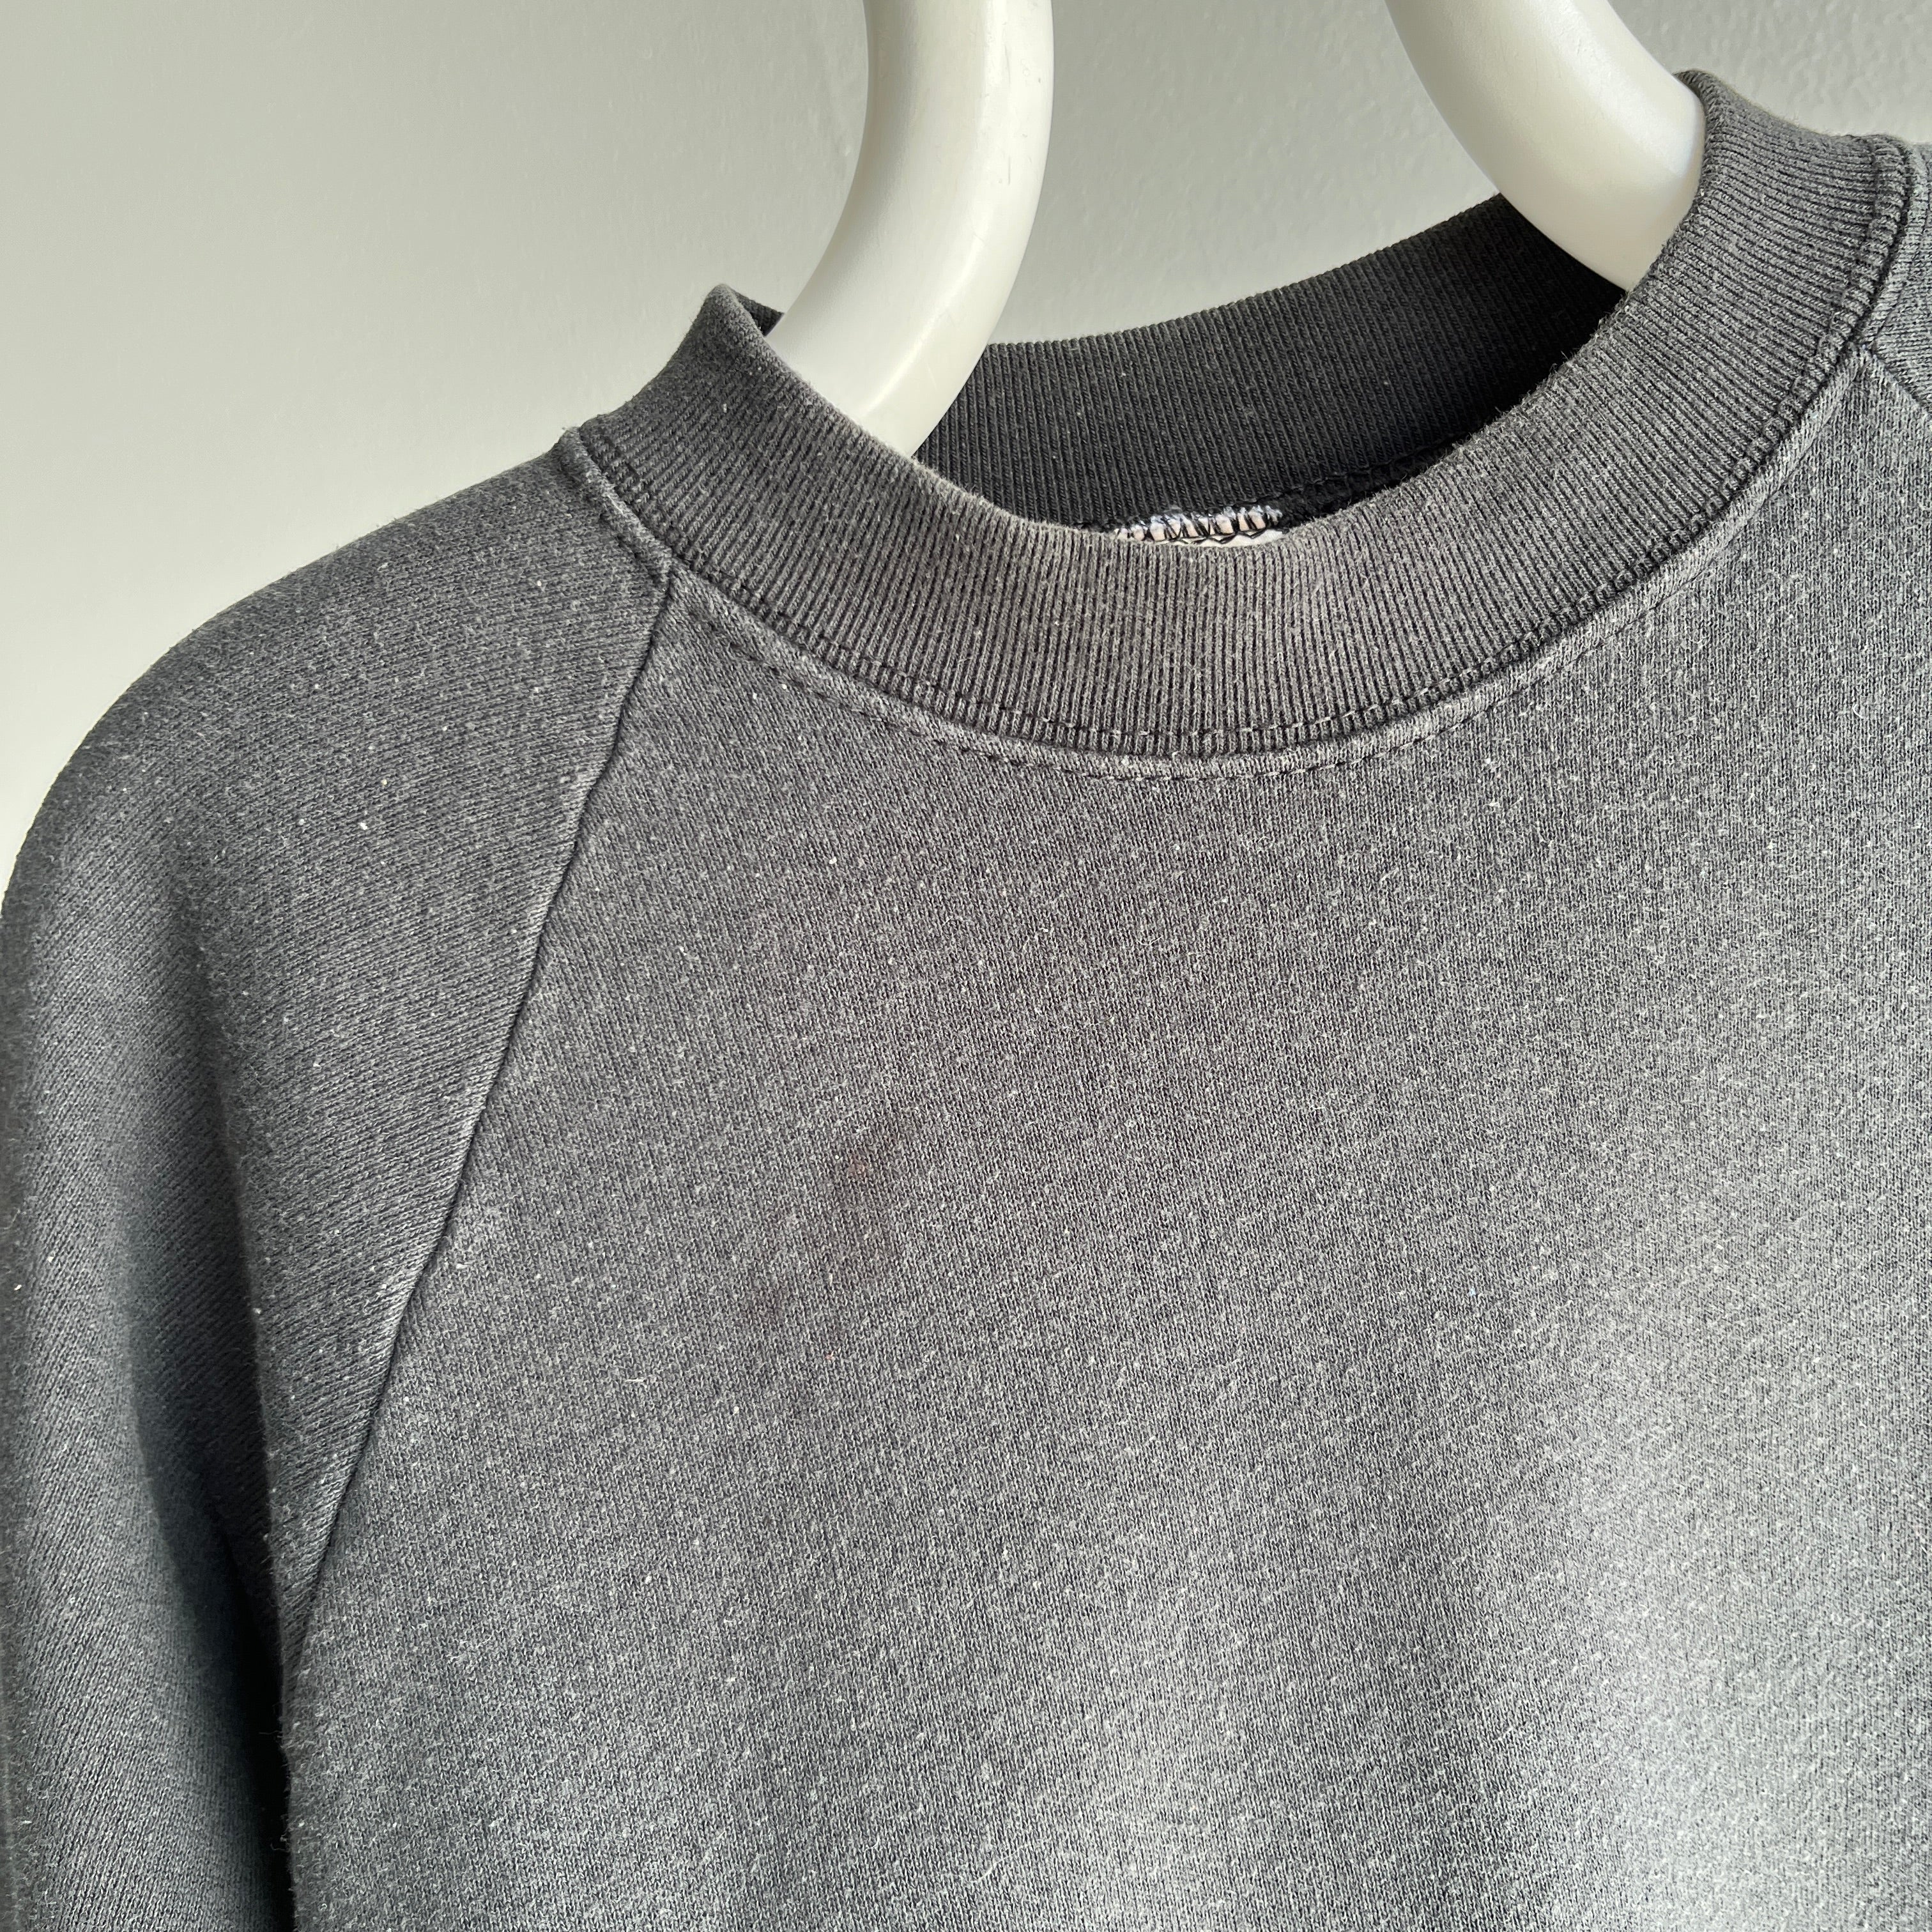 1980s FOTL Blank Black Sweatshirt with Staining and Wear